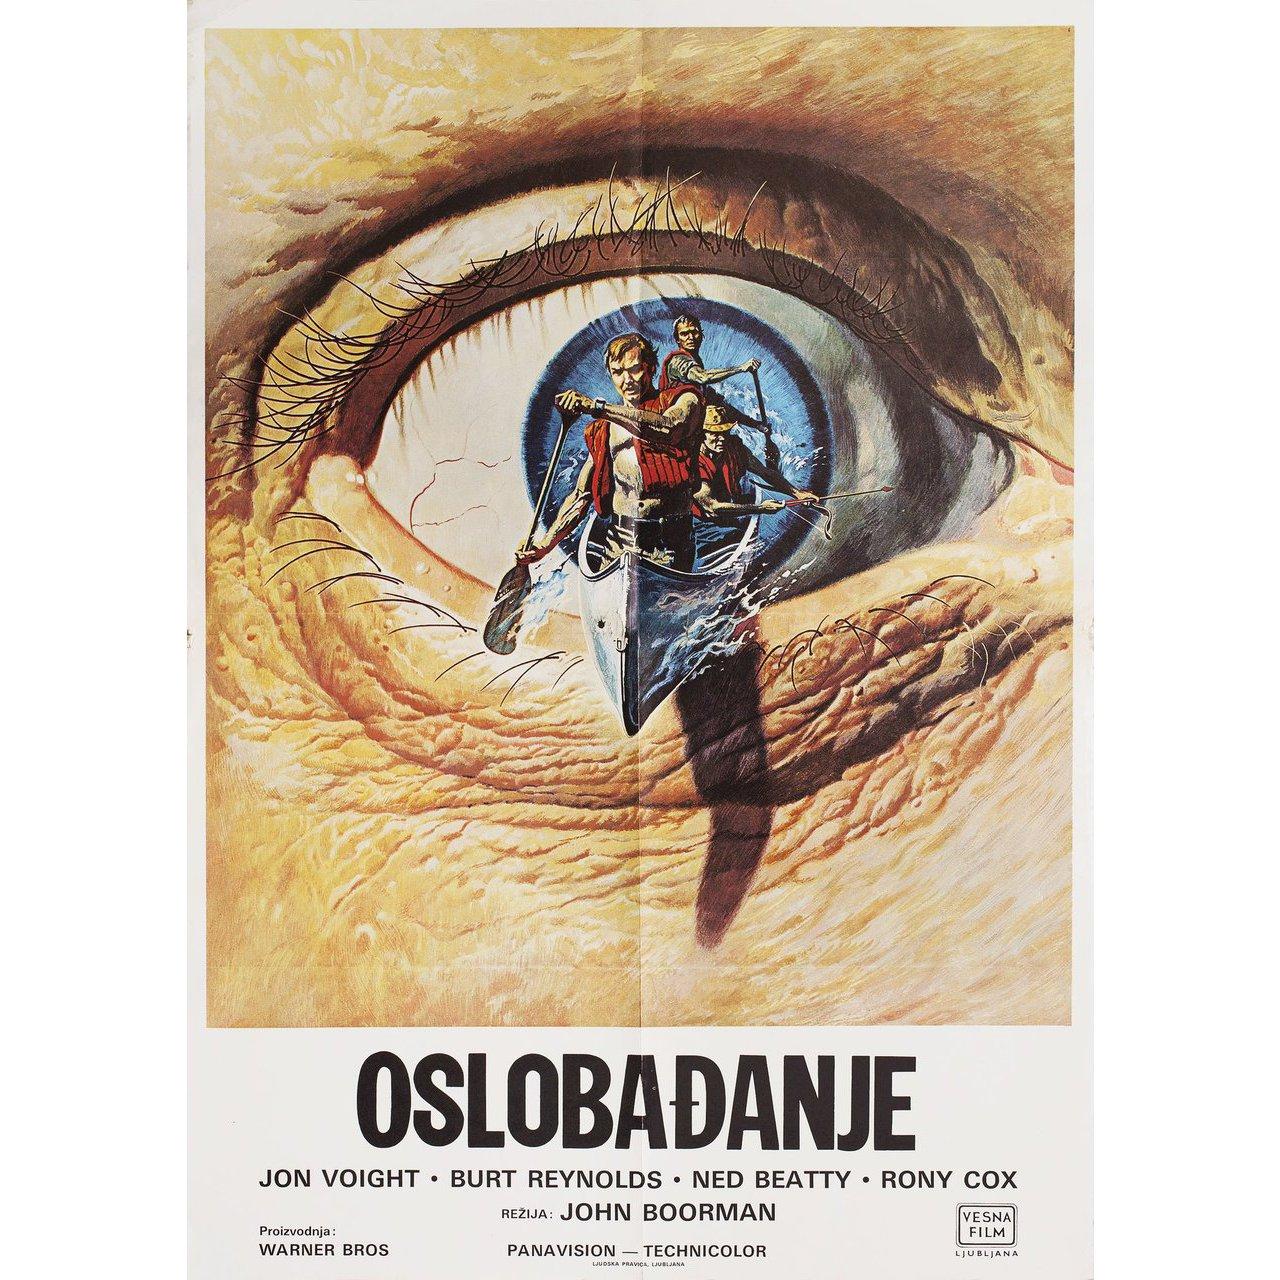 Original 1972 Yugoslav B2 poster by William Teason for the film Deliverance directed by John Boorman with Jon Voight / Burt Reynolds / Ned Beatty / Ronny Cox. Very Good-Fine condition, folded. Many original posters were issued folded or were